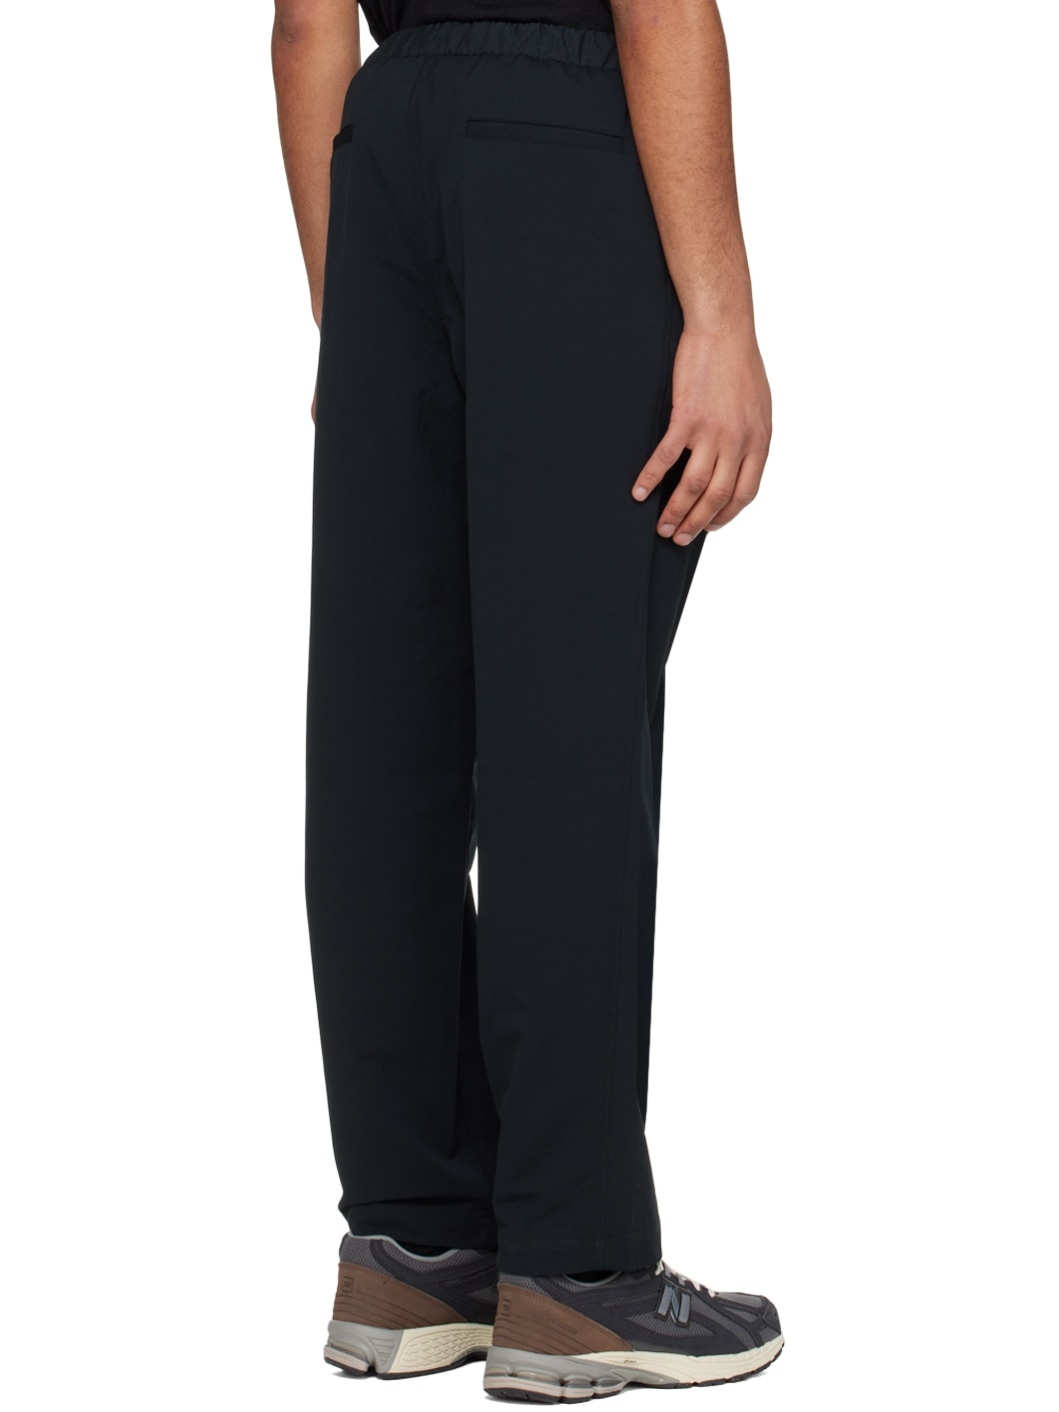 Black Wide Easy Trousers - 3